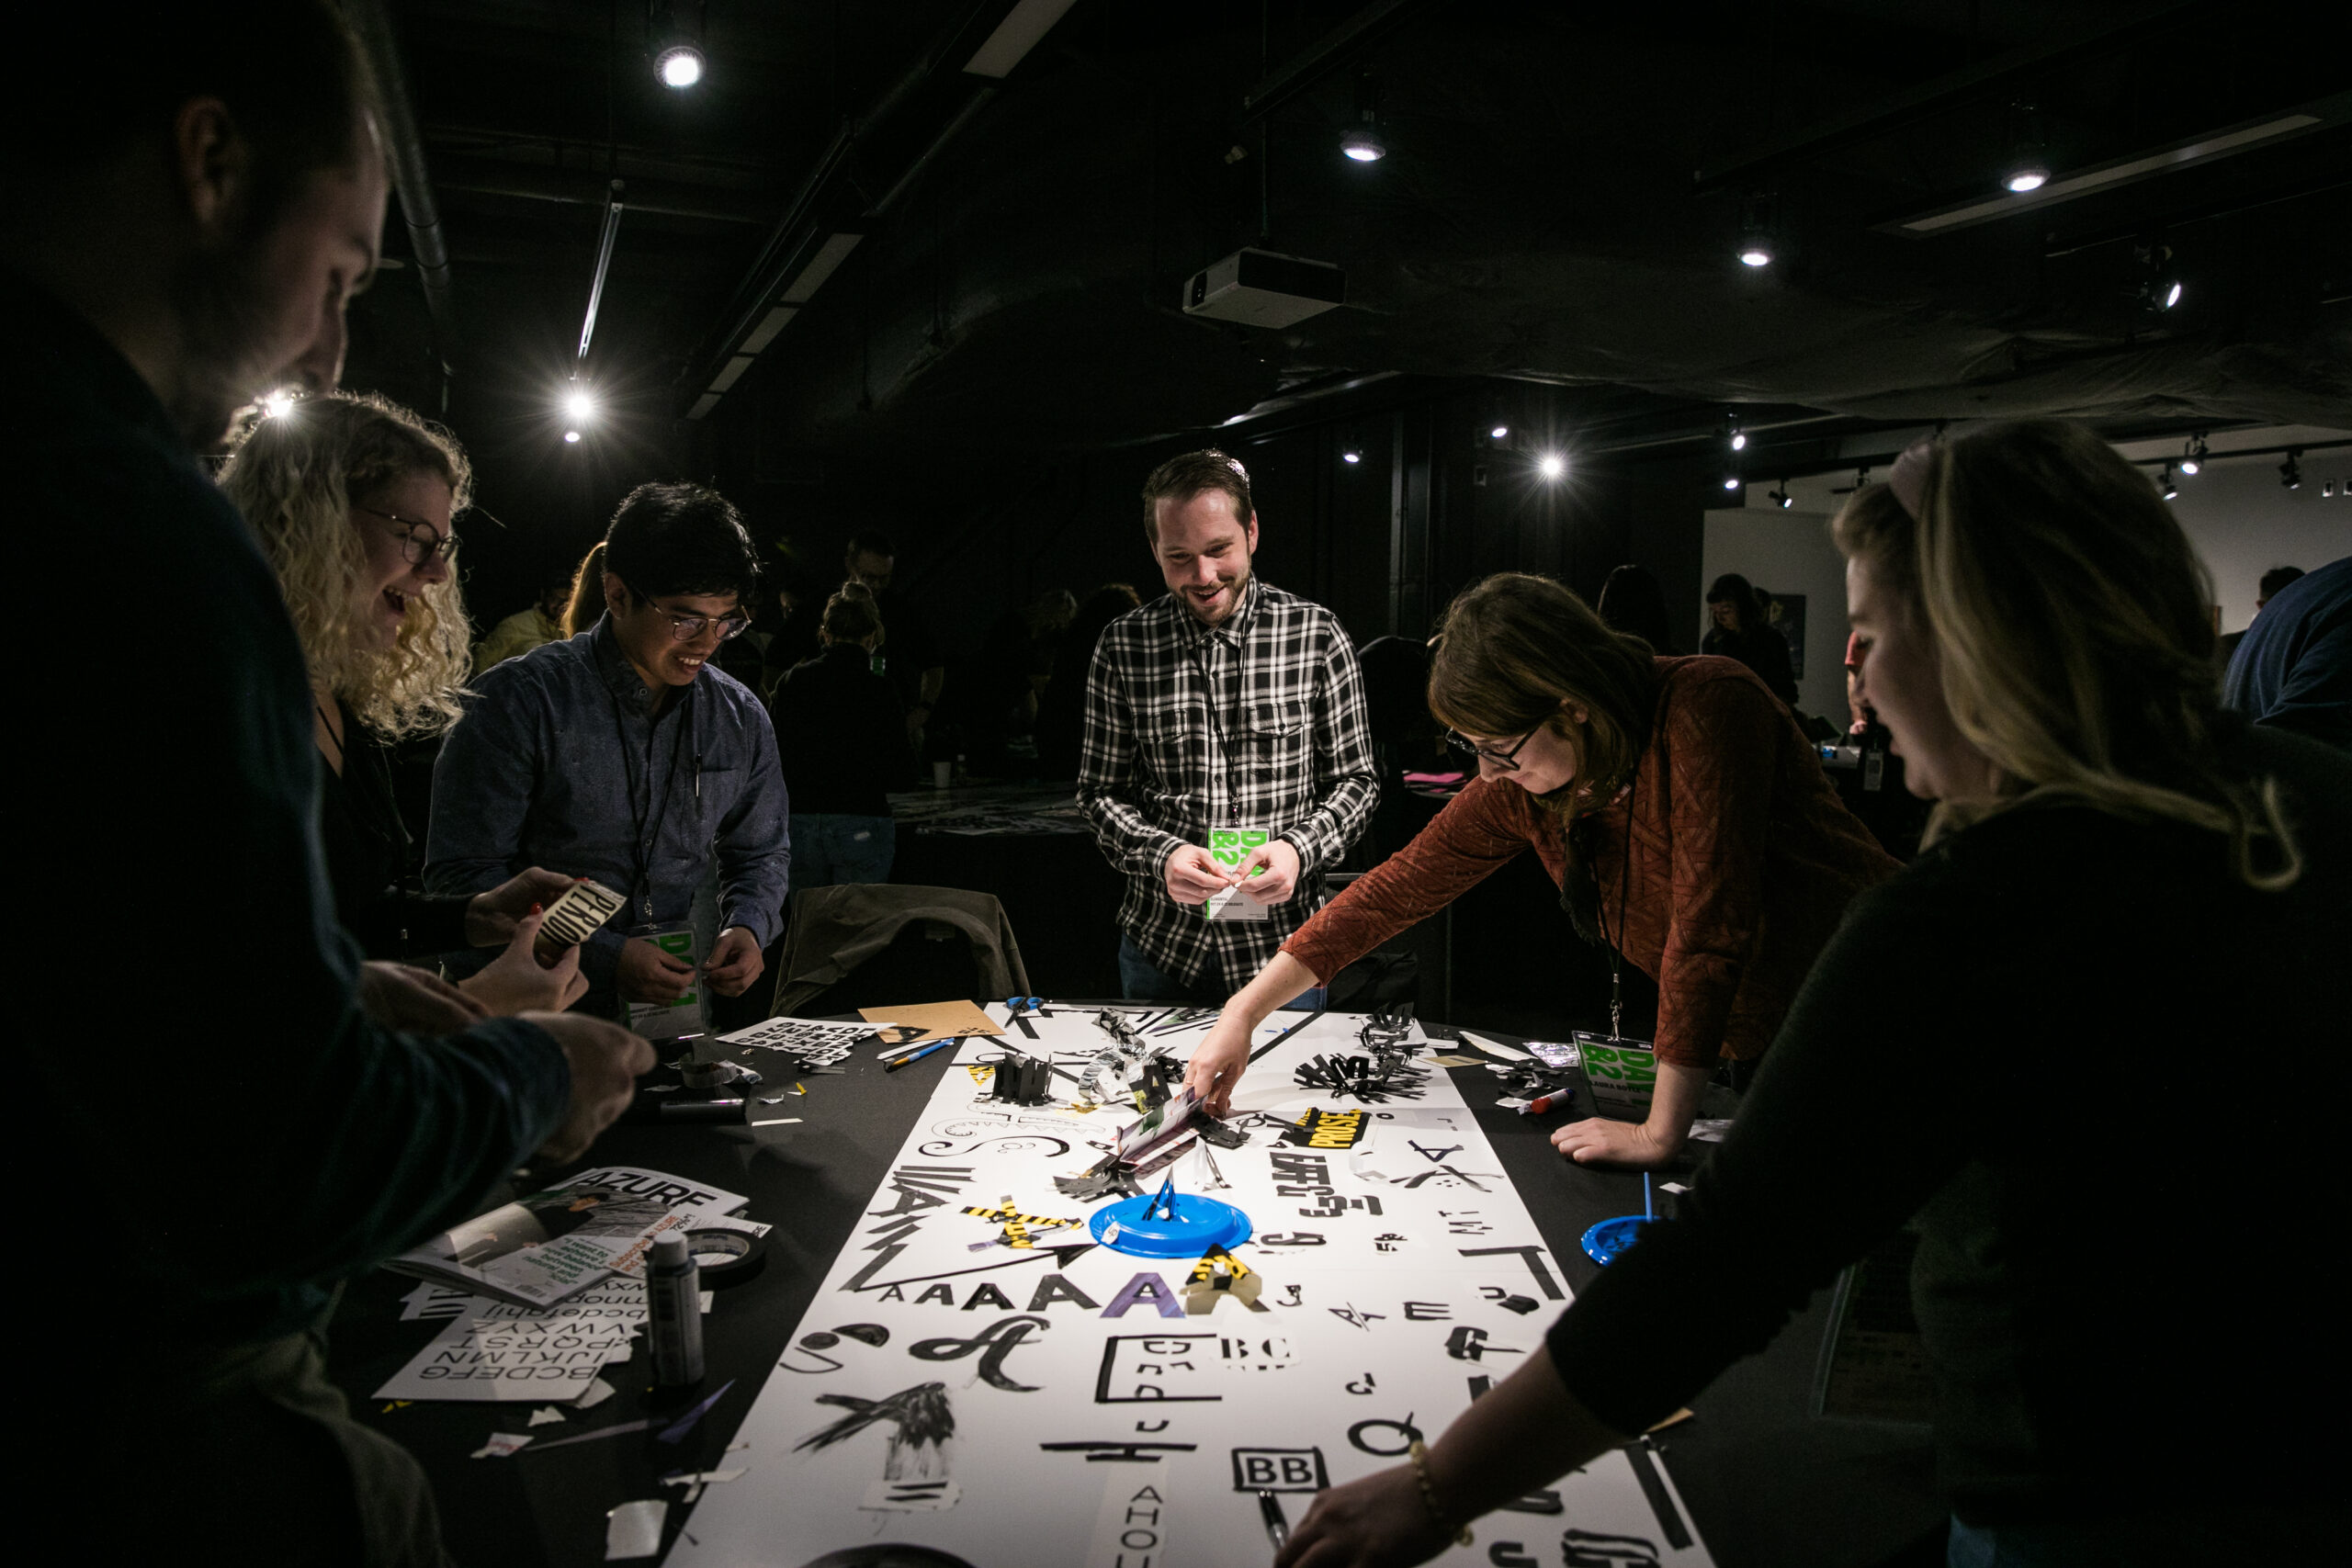 Group of persons around a table working on a typography workshop